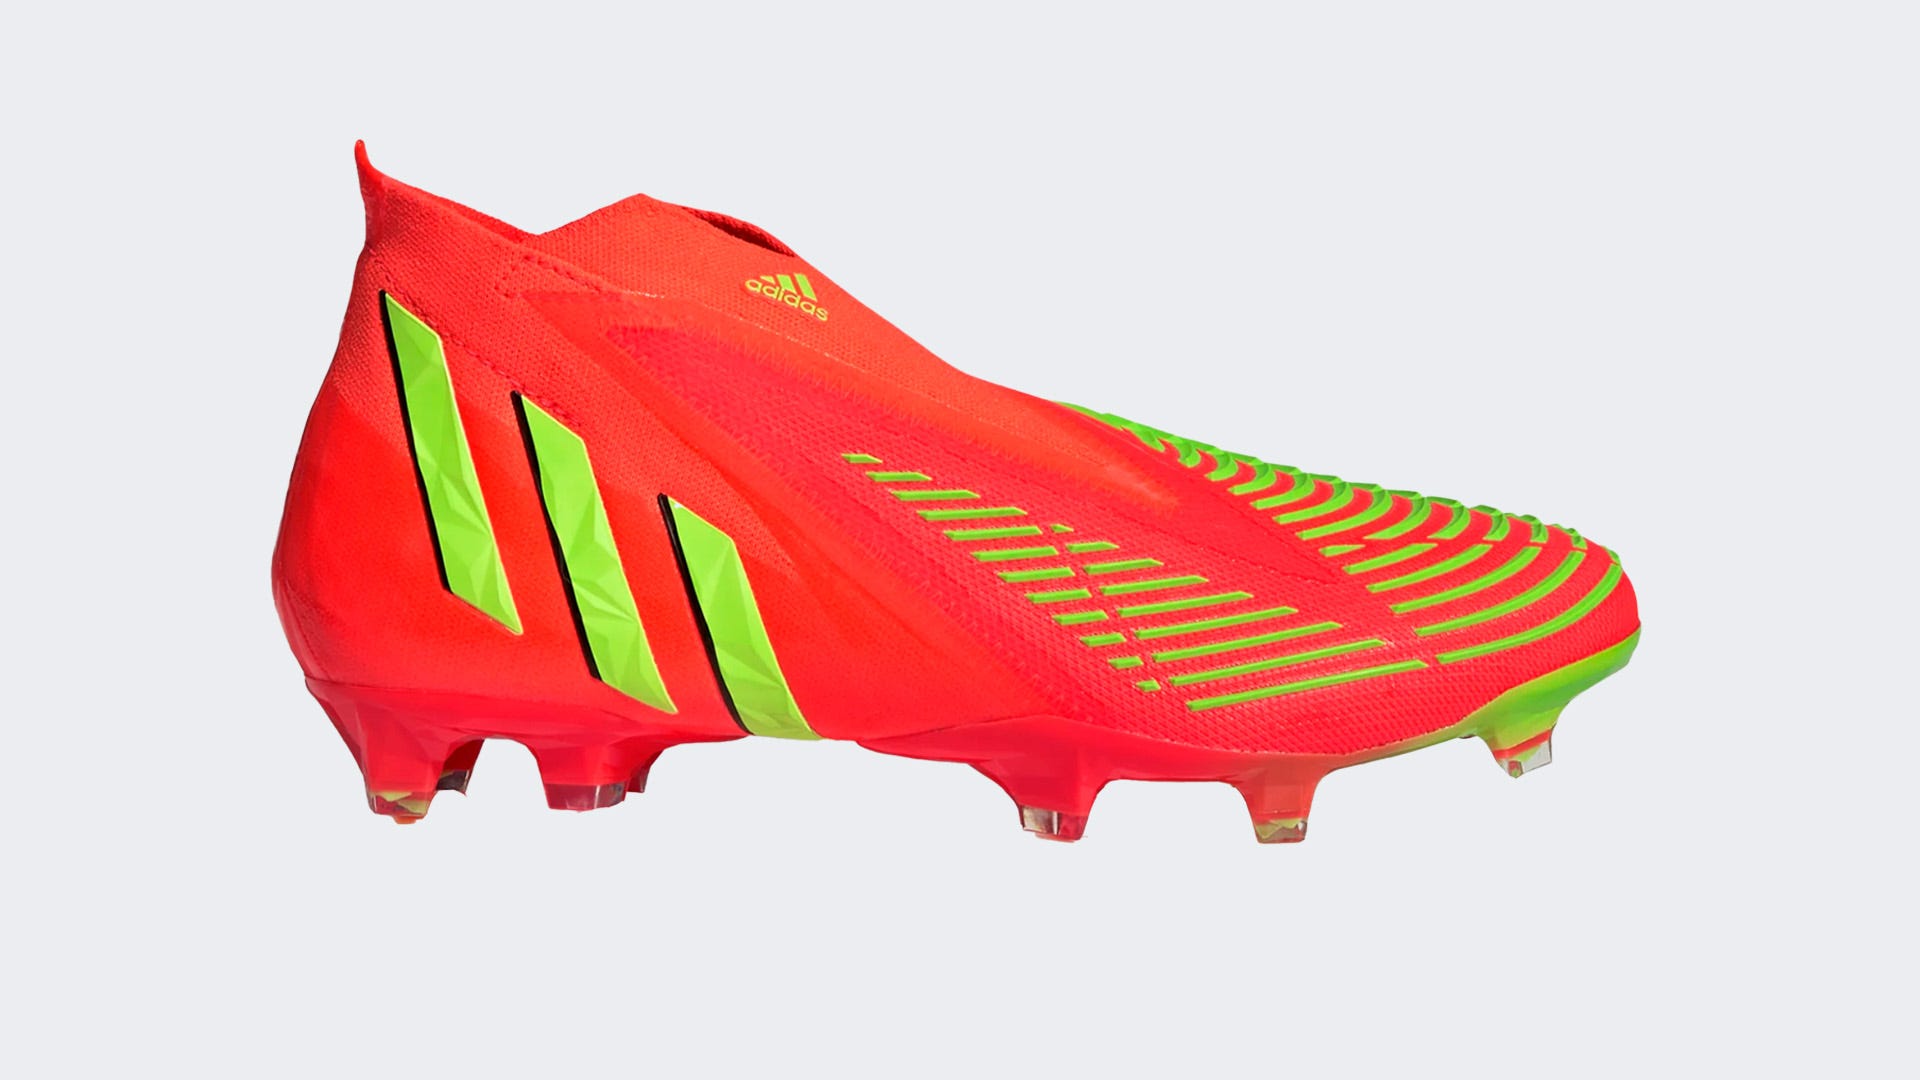 Sombra Comerciante chico The best adidas football boots you can buy in 2022 | Goal.com